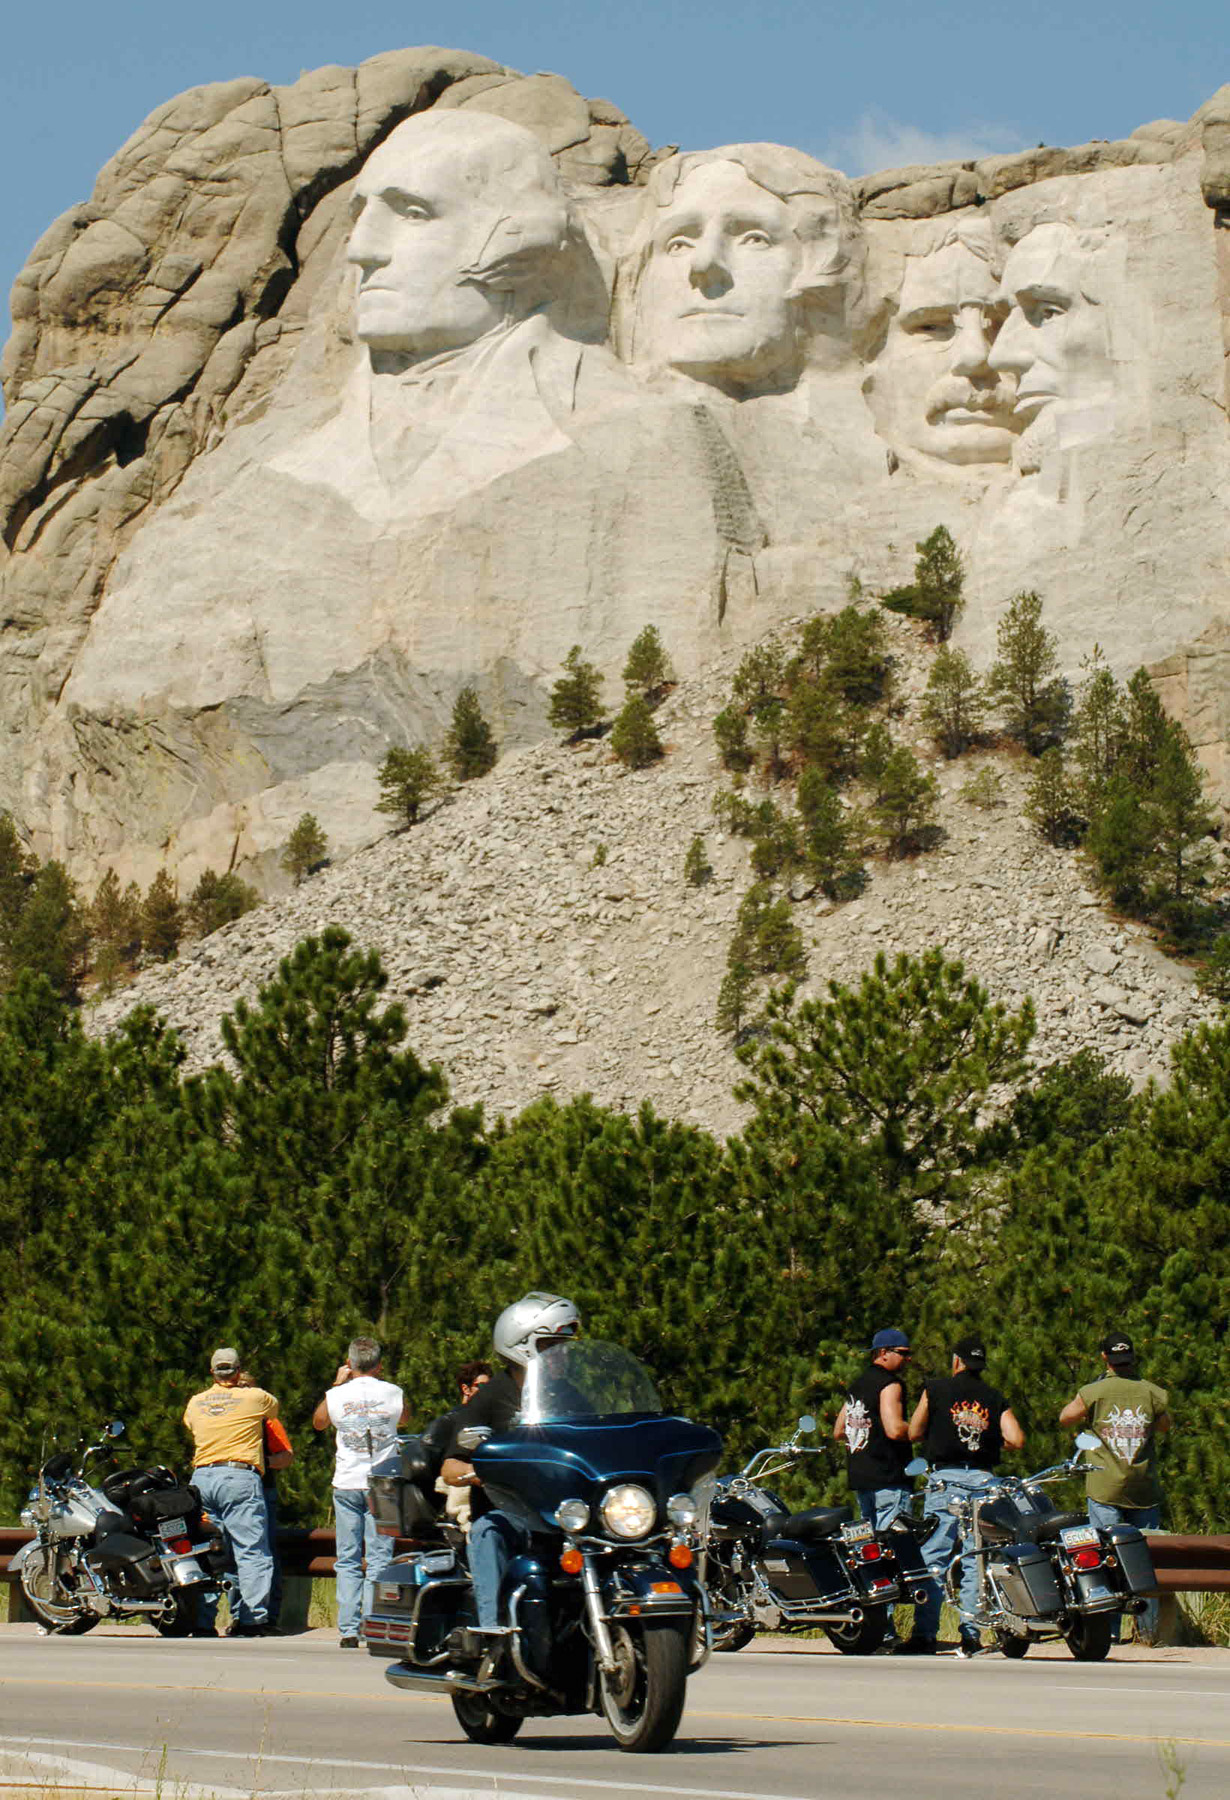 A rider leaves Mt. Rushmore, Sunday, August 7, 2005, as others stop on the shoulder to shoot photos.